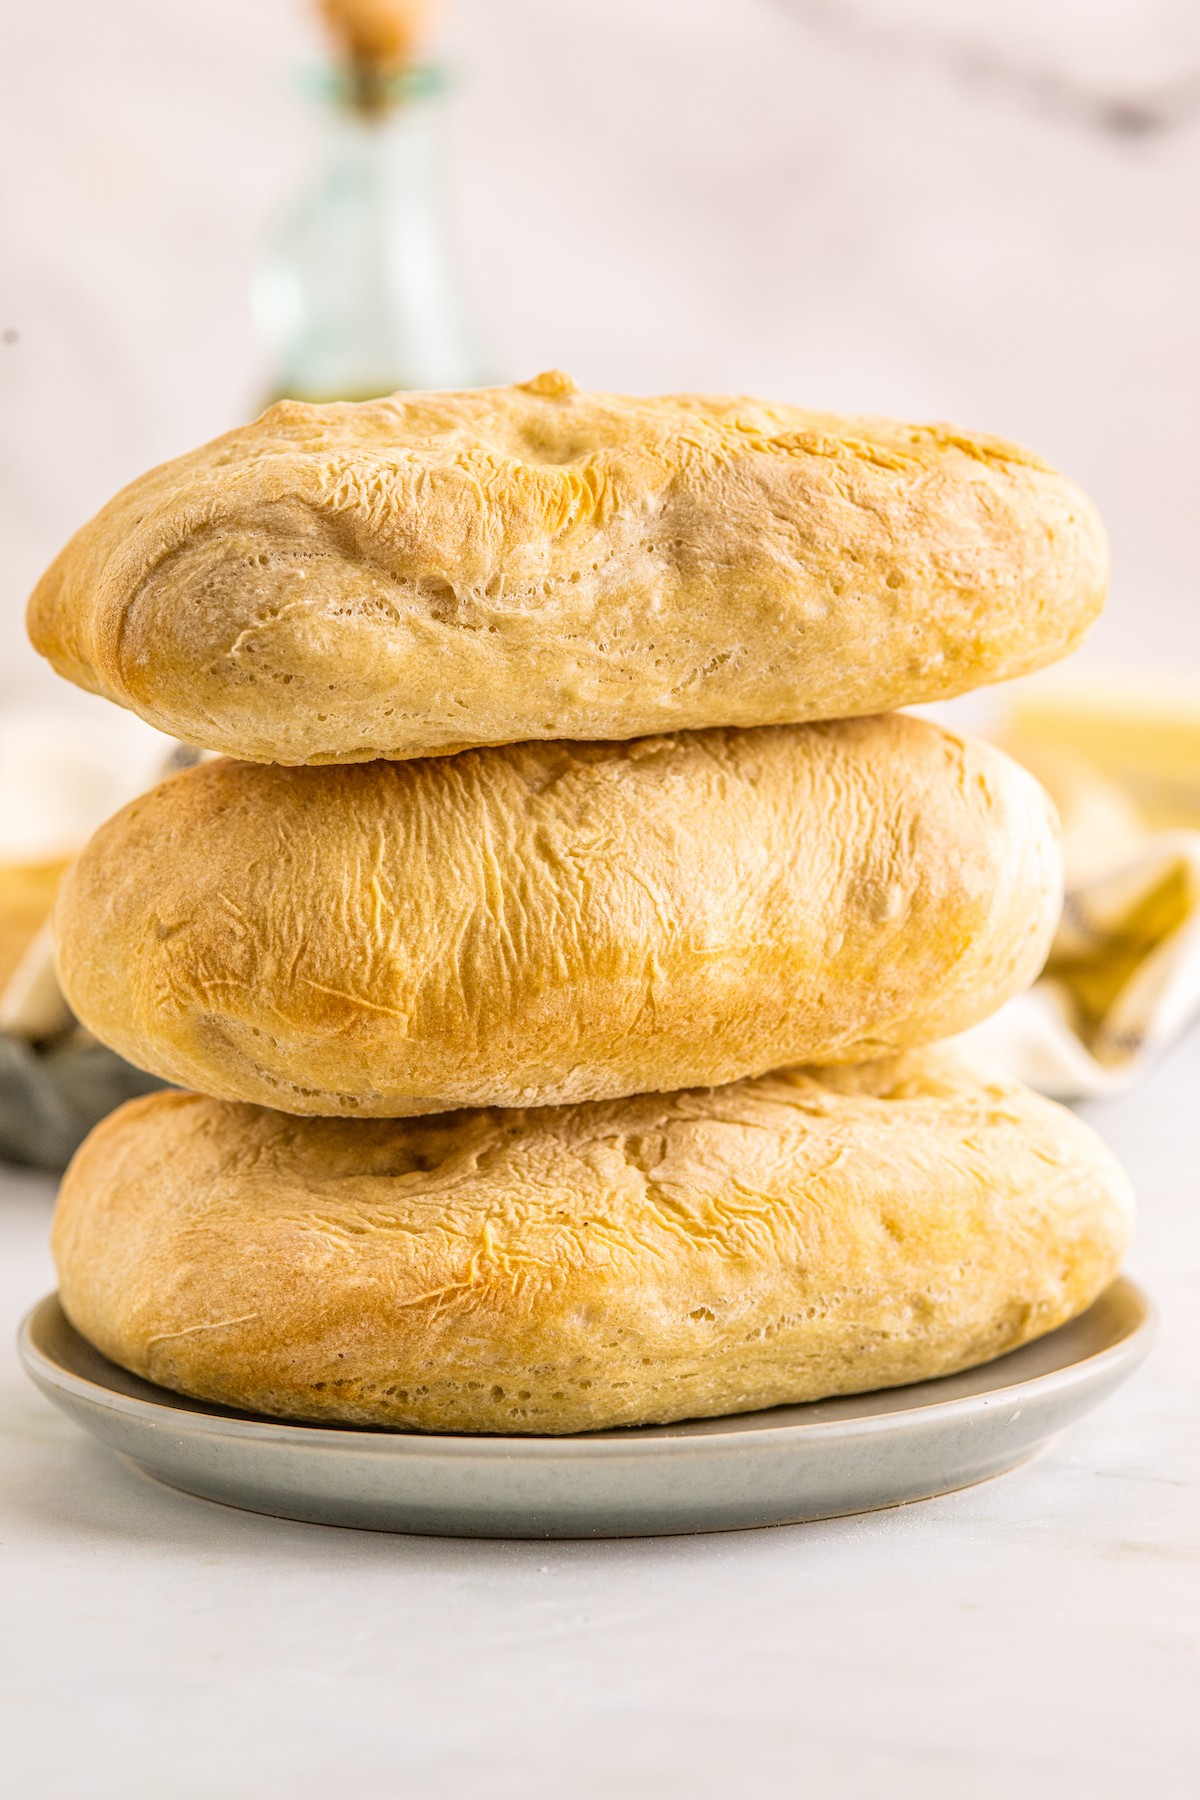 Three ciabatta rolls stacked on top of each other.